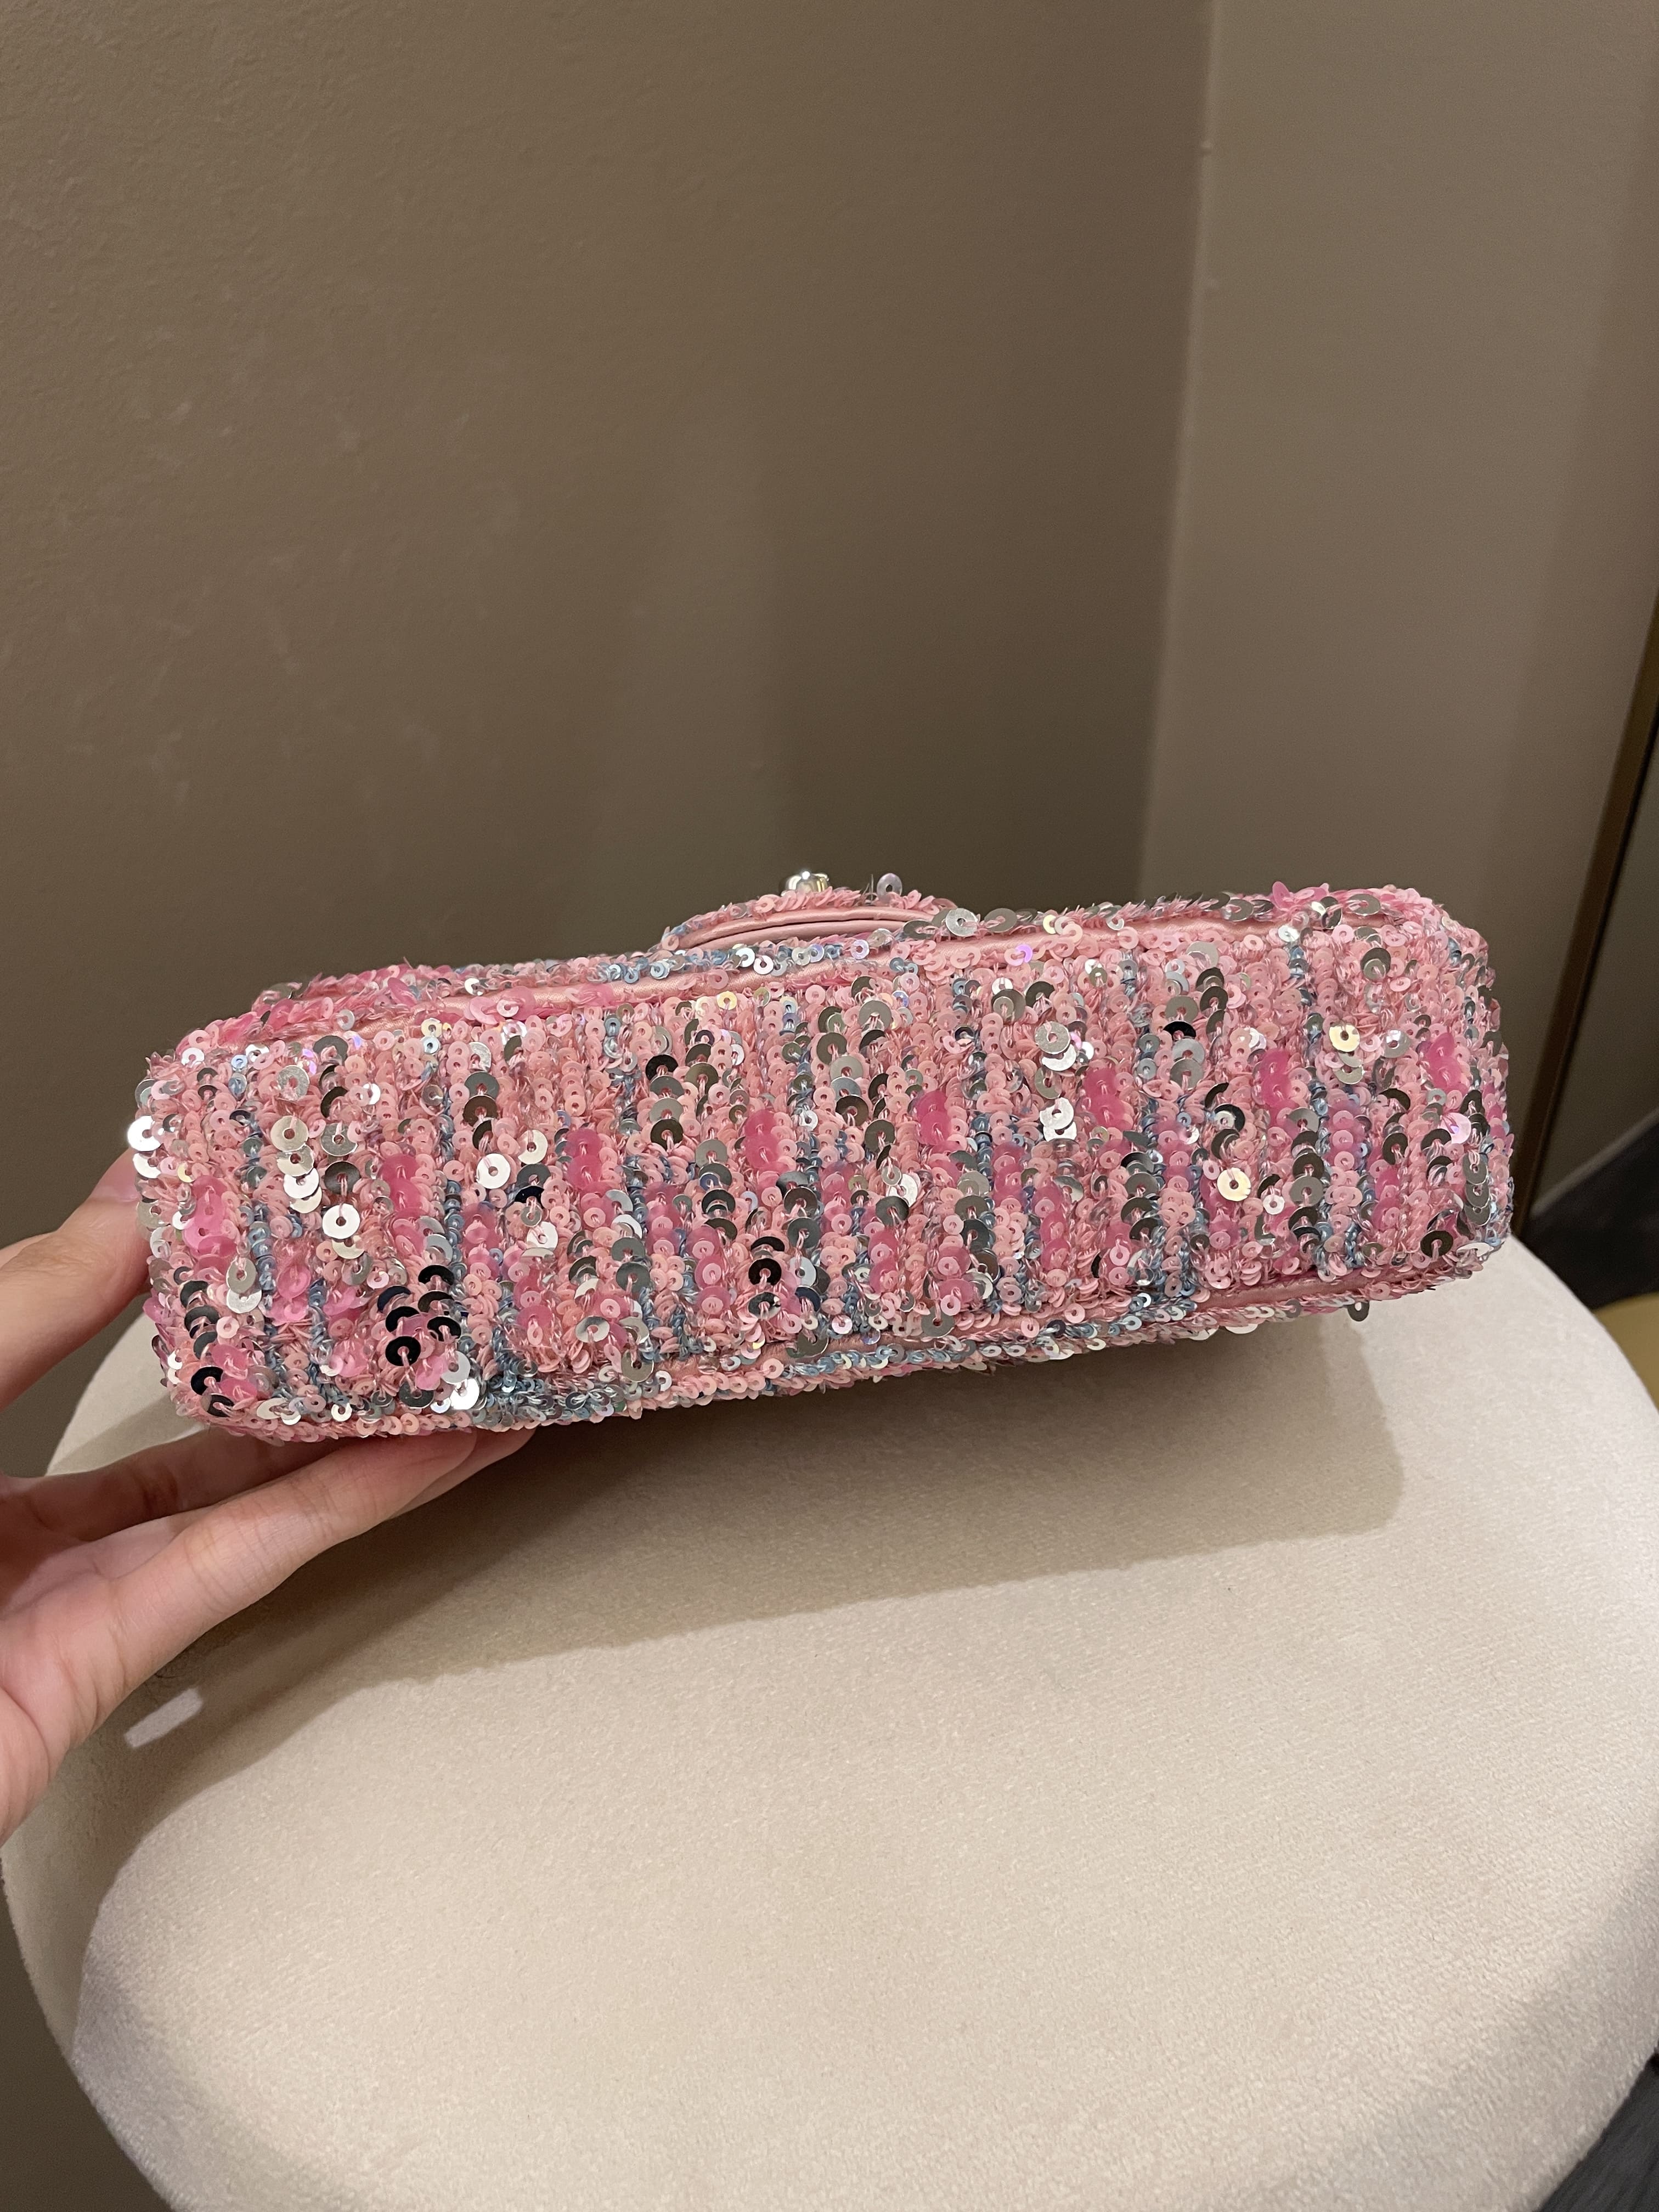 Chanel Quilted Mini Rectangular Flap Bag Pink Sequins